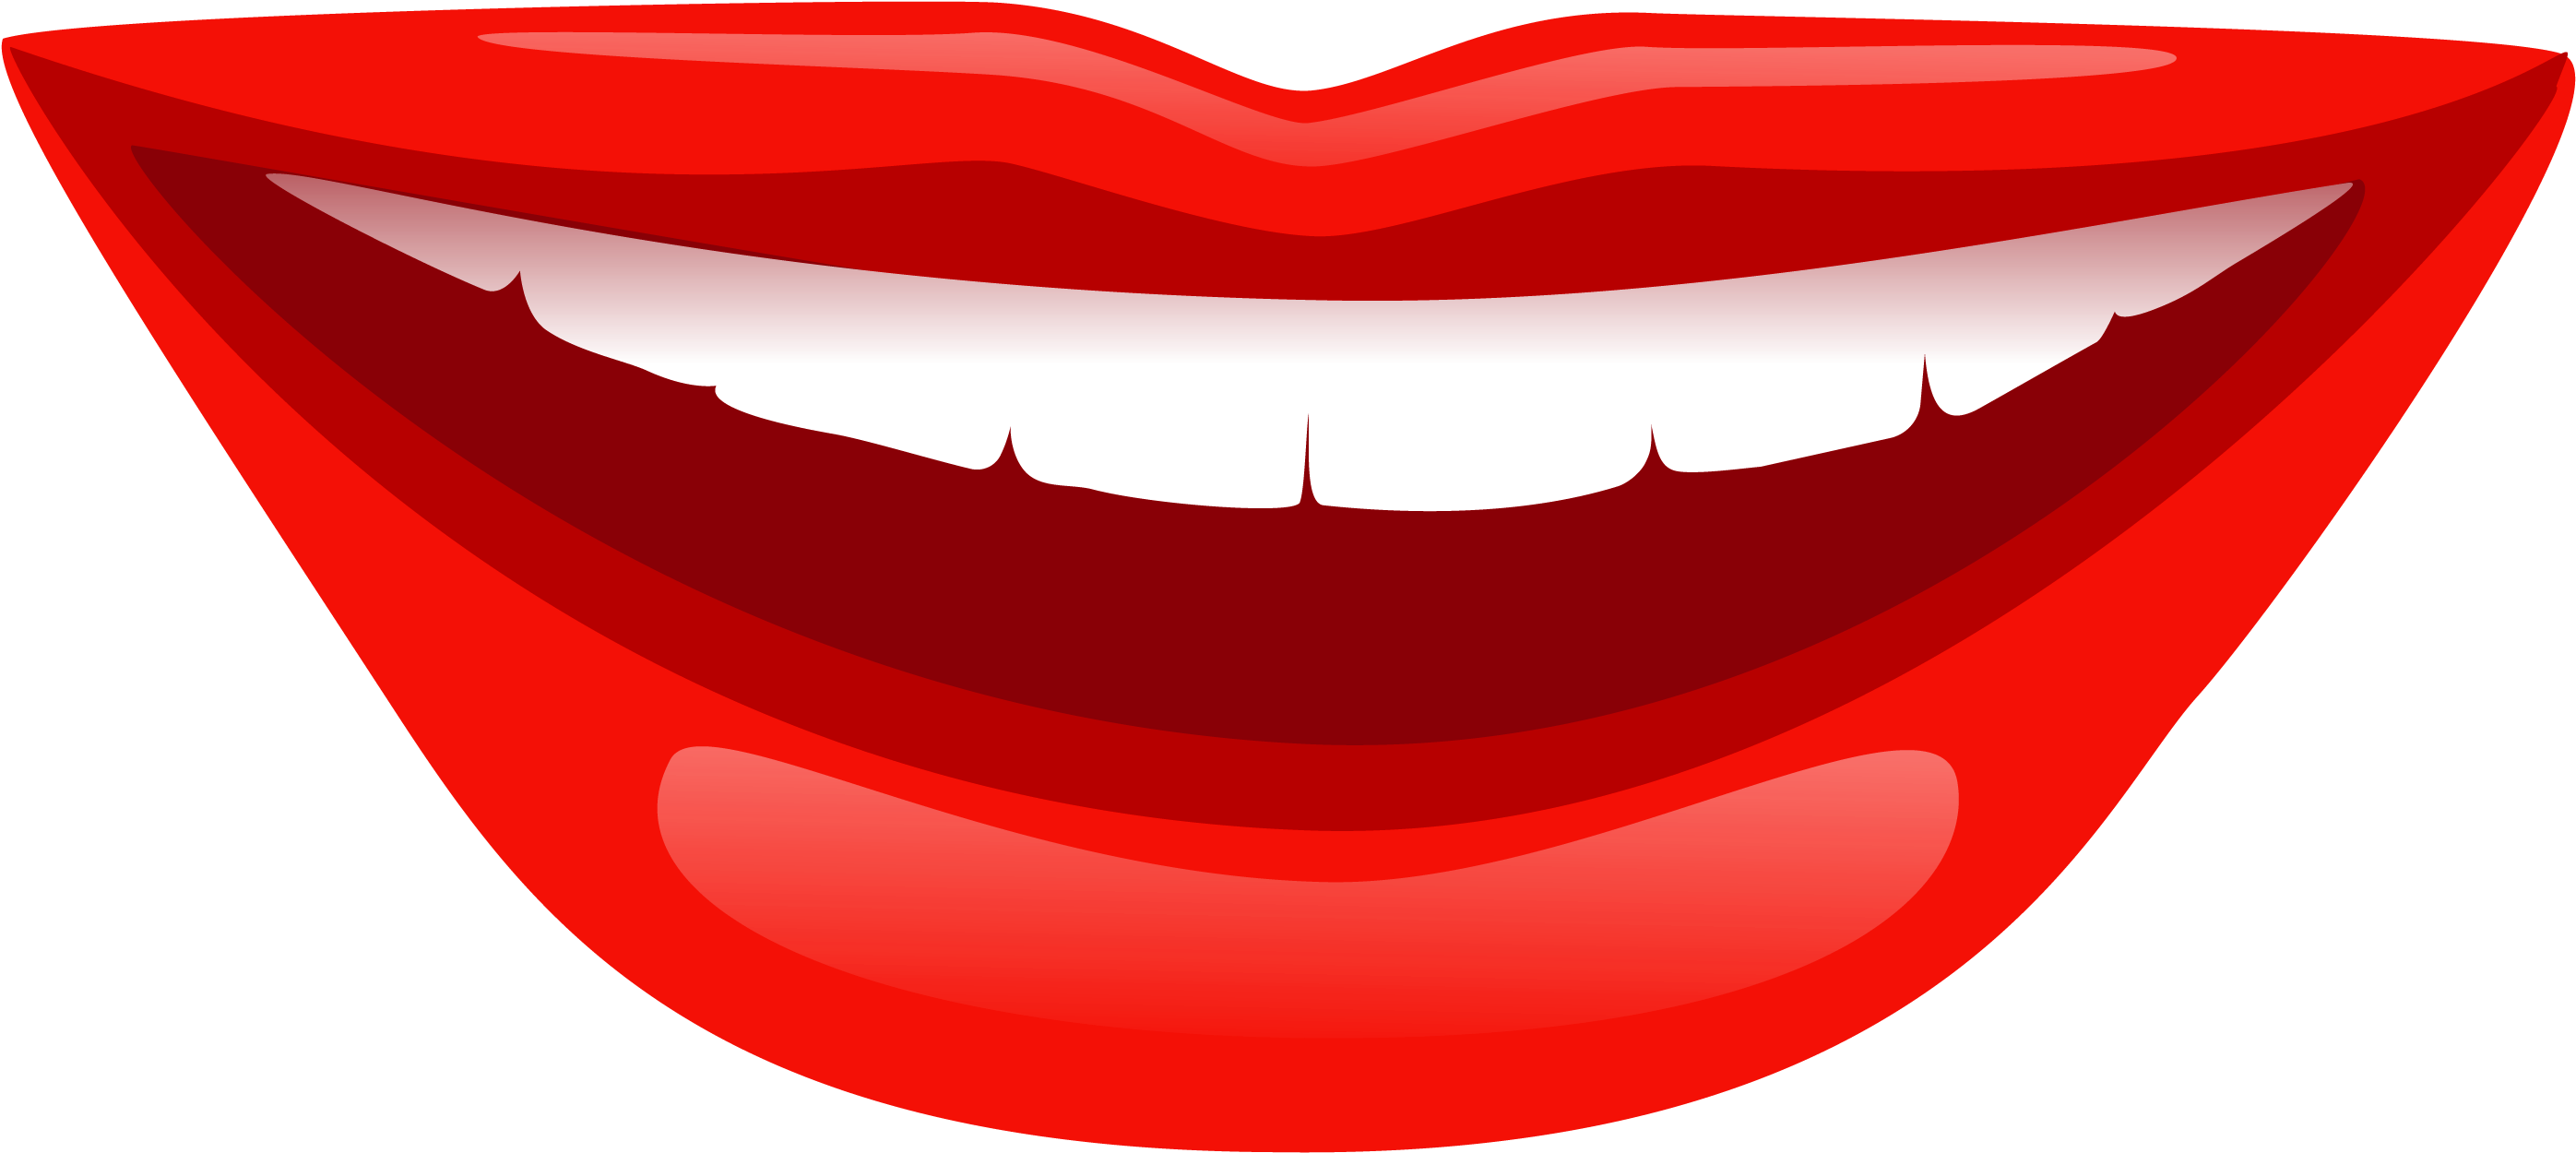 Smiling Lips - Lips Smile Png (3000x1878)